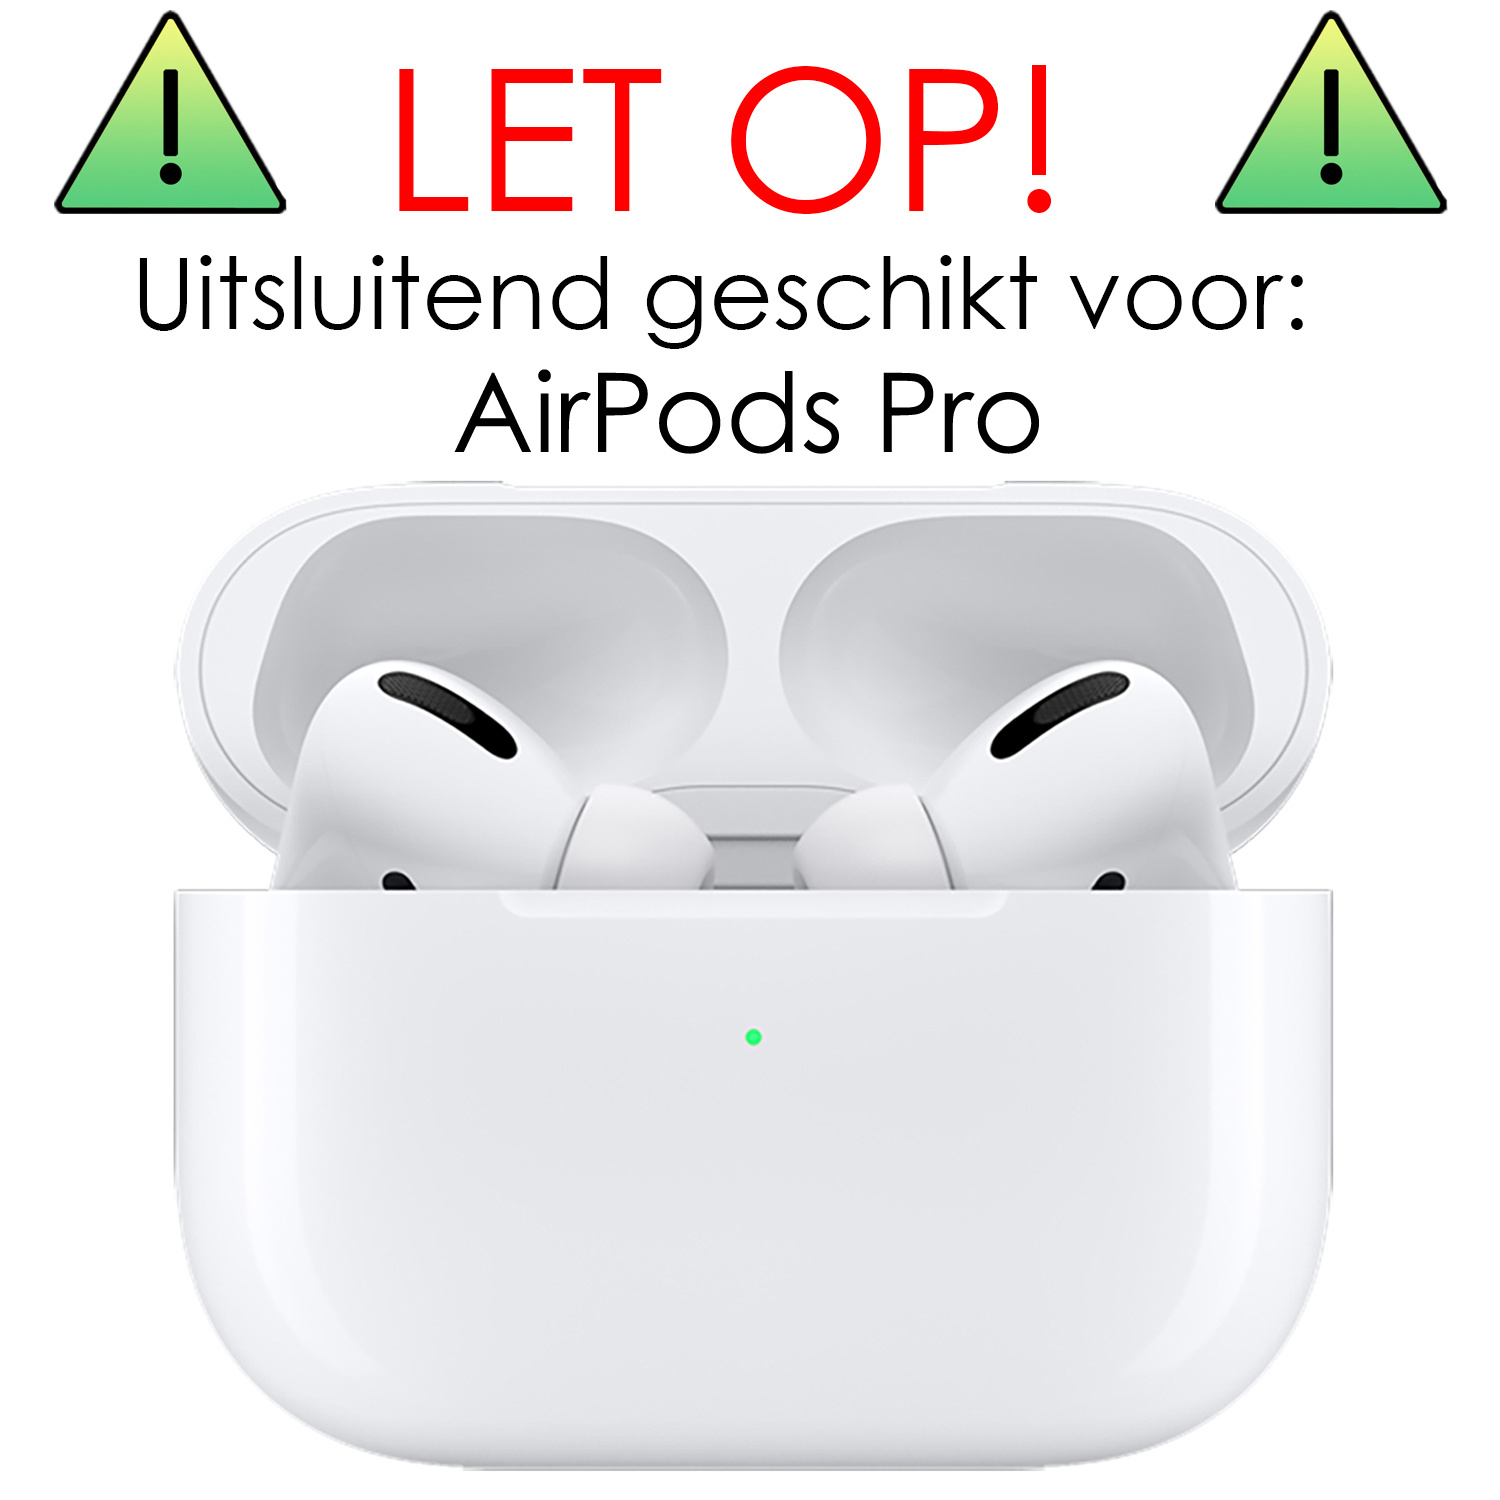 NoXx Hoes Geschikt voor Airpods Pro Hoesje Cover Silicone Case Hoes - Lichtblauw - 2x